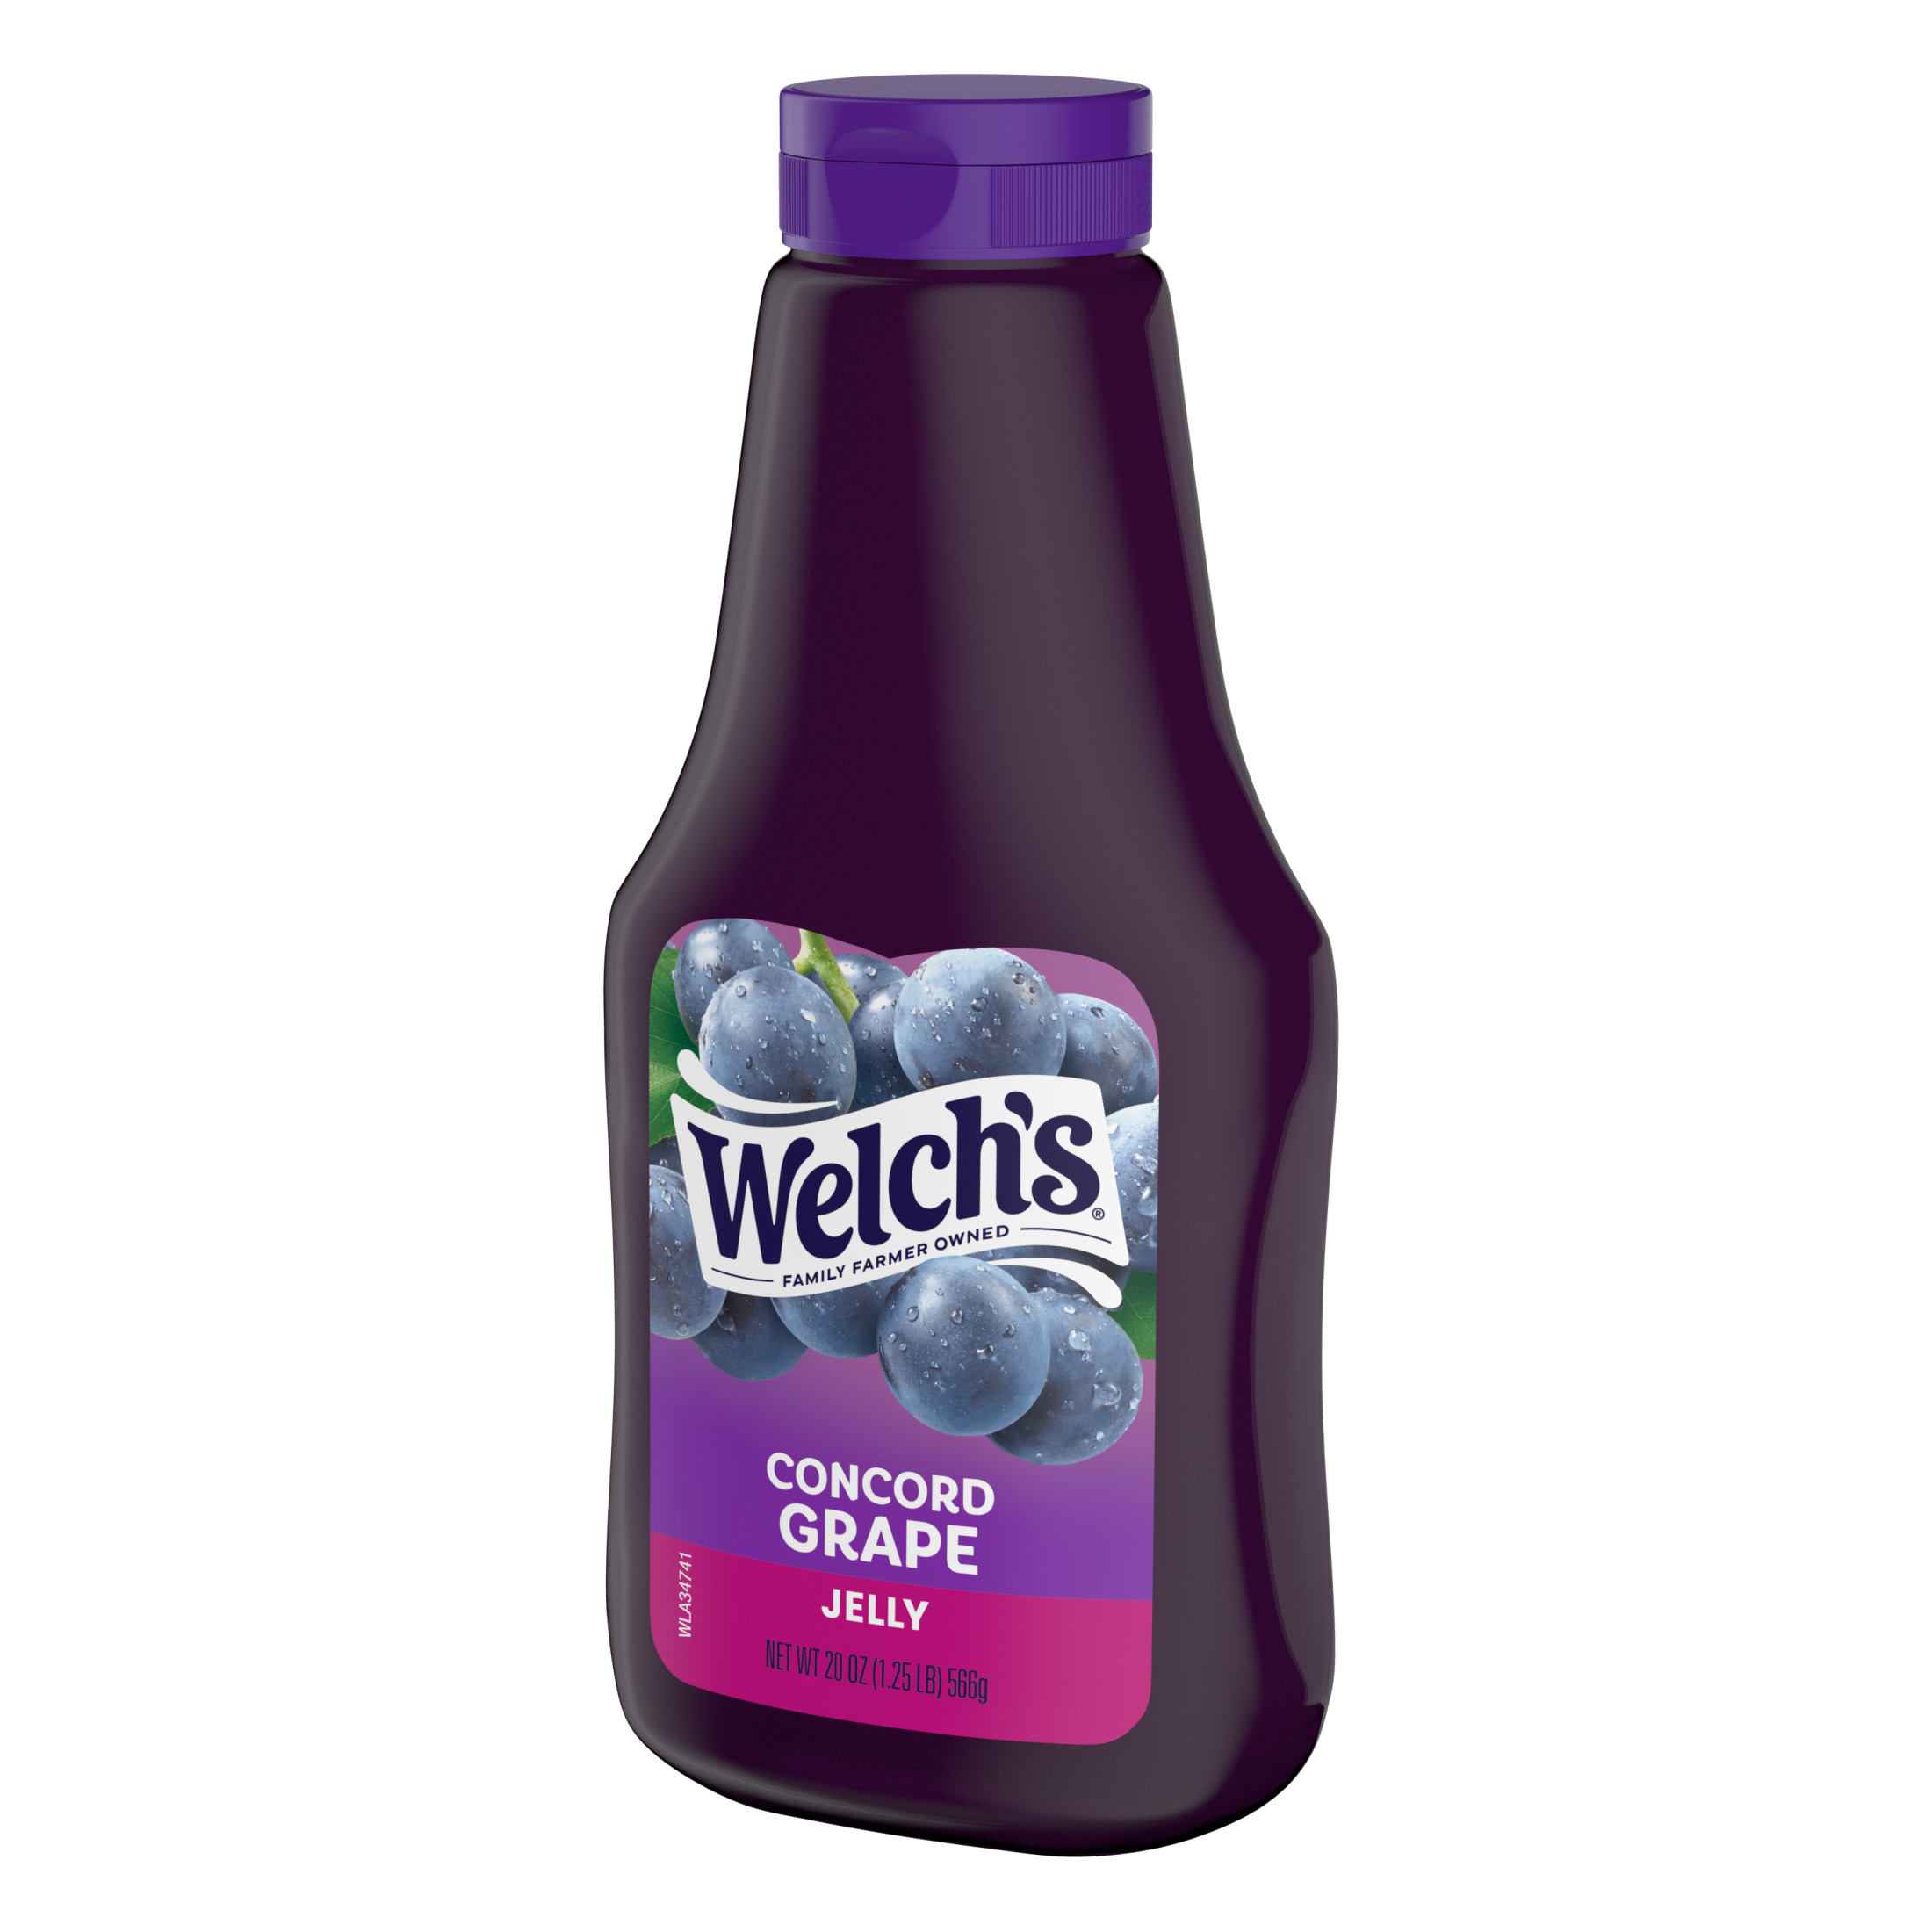 Welch's Concord Grape Jelly, 20 oz Squeeze Bottle - image 2 of 6